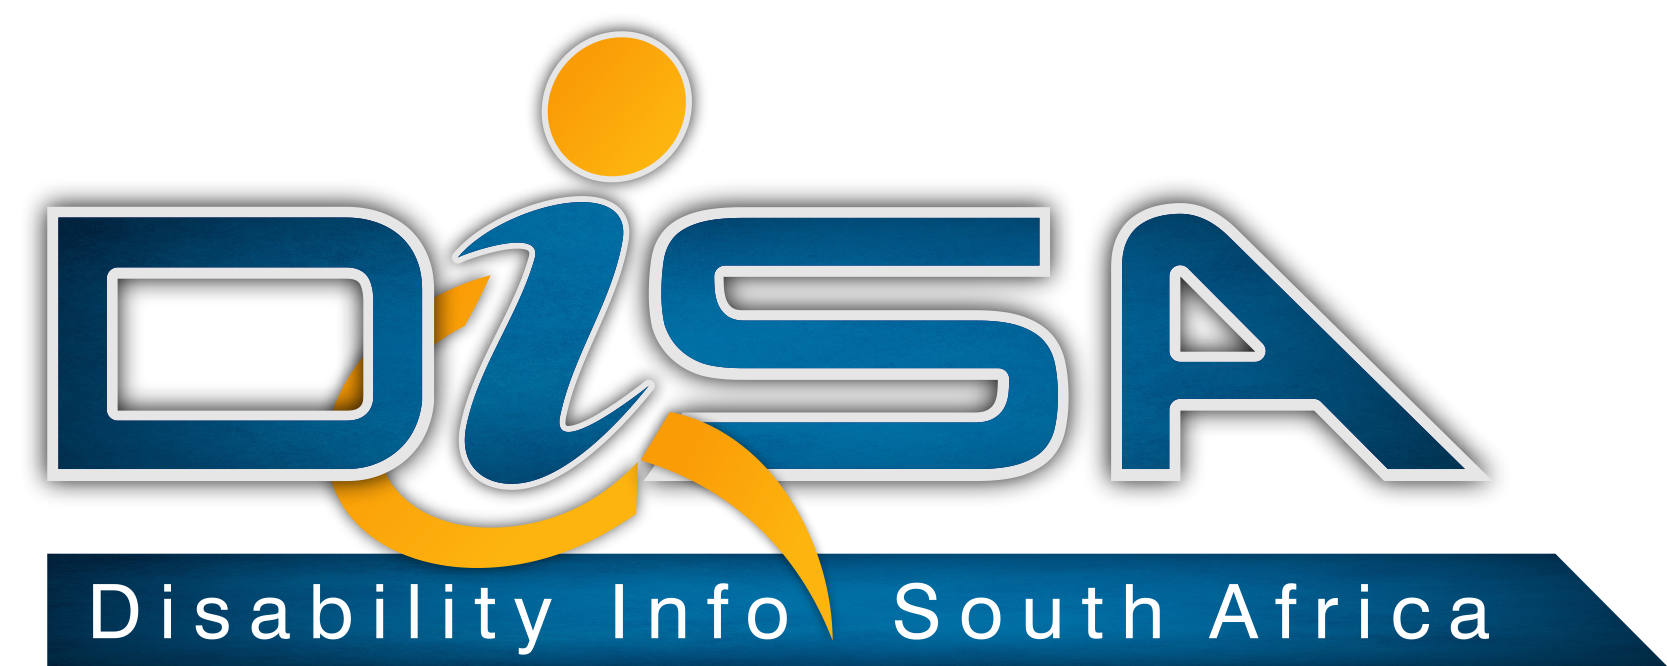 Disability info South Africa (DiSA)